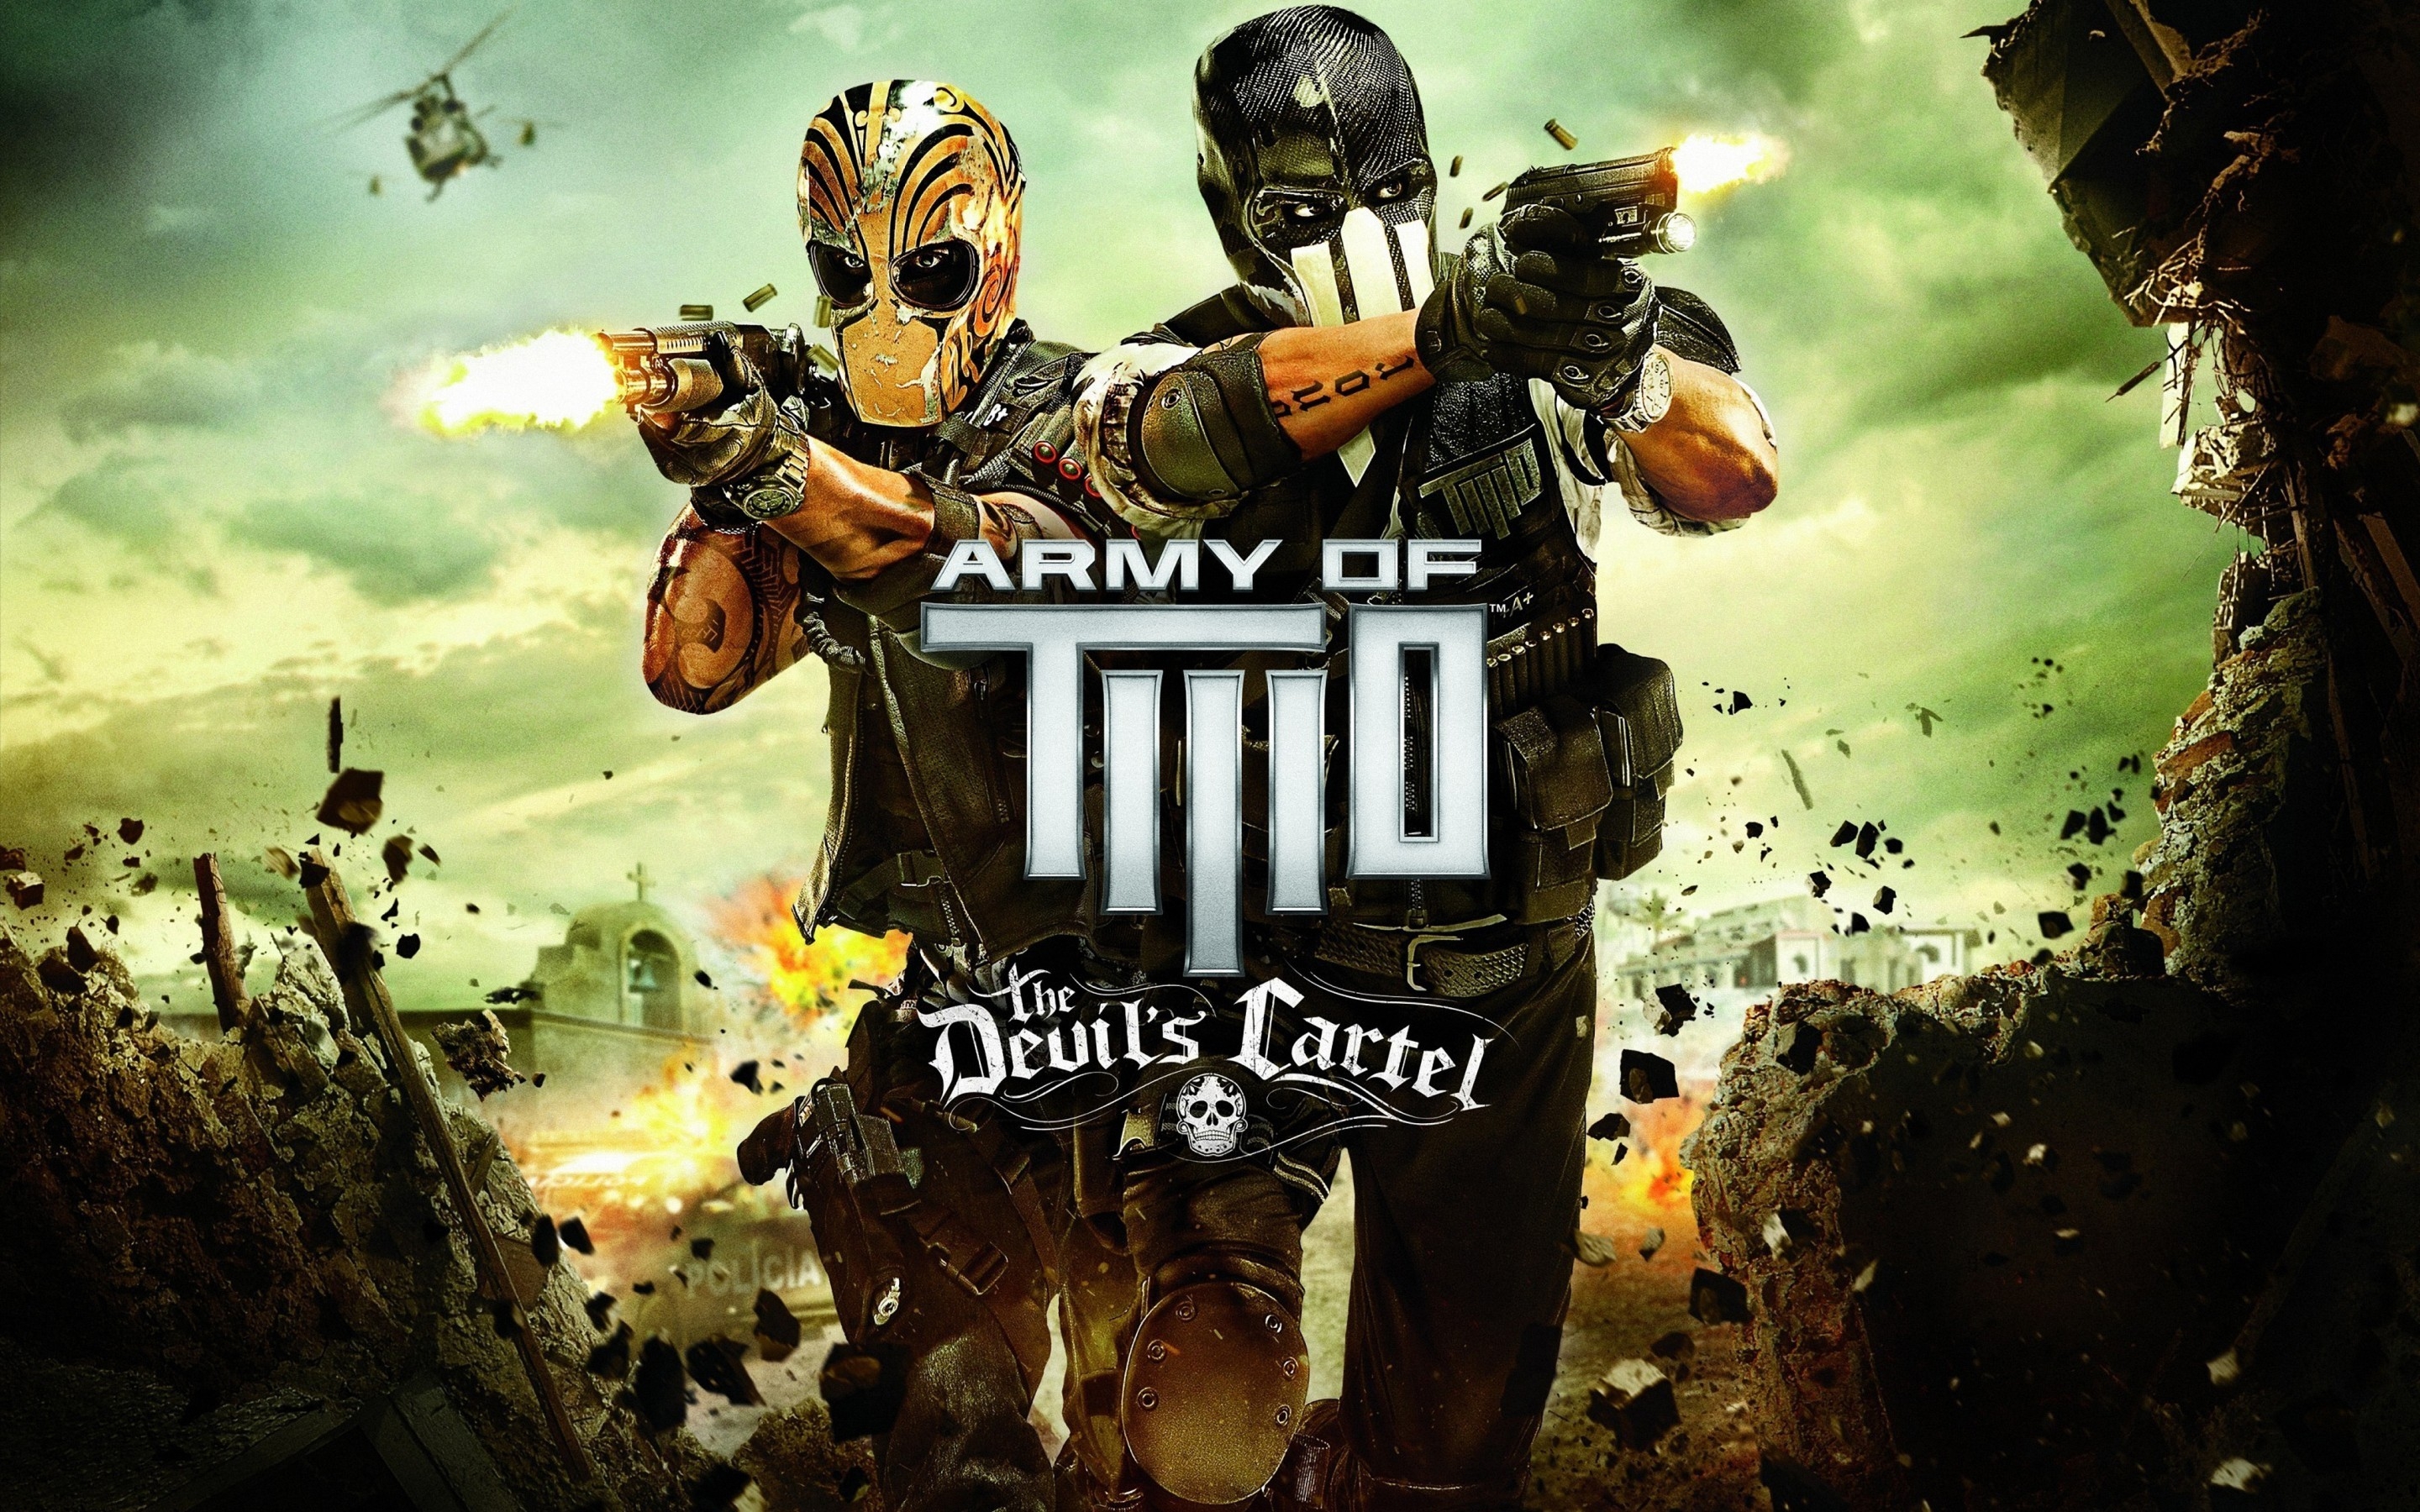 Army of TwoThe Devil's Cartel for 2880 x 1800 Retina Display resolution